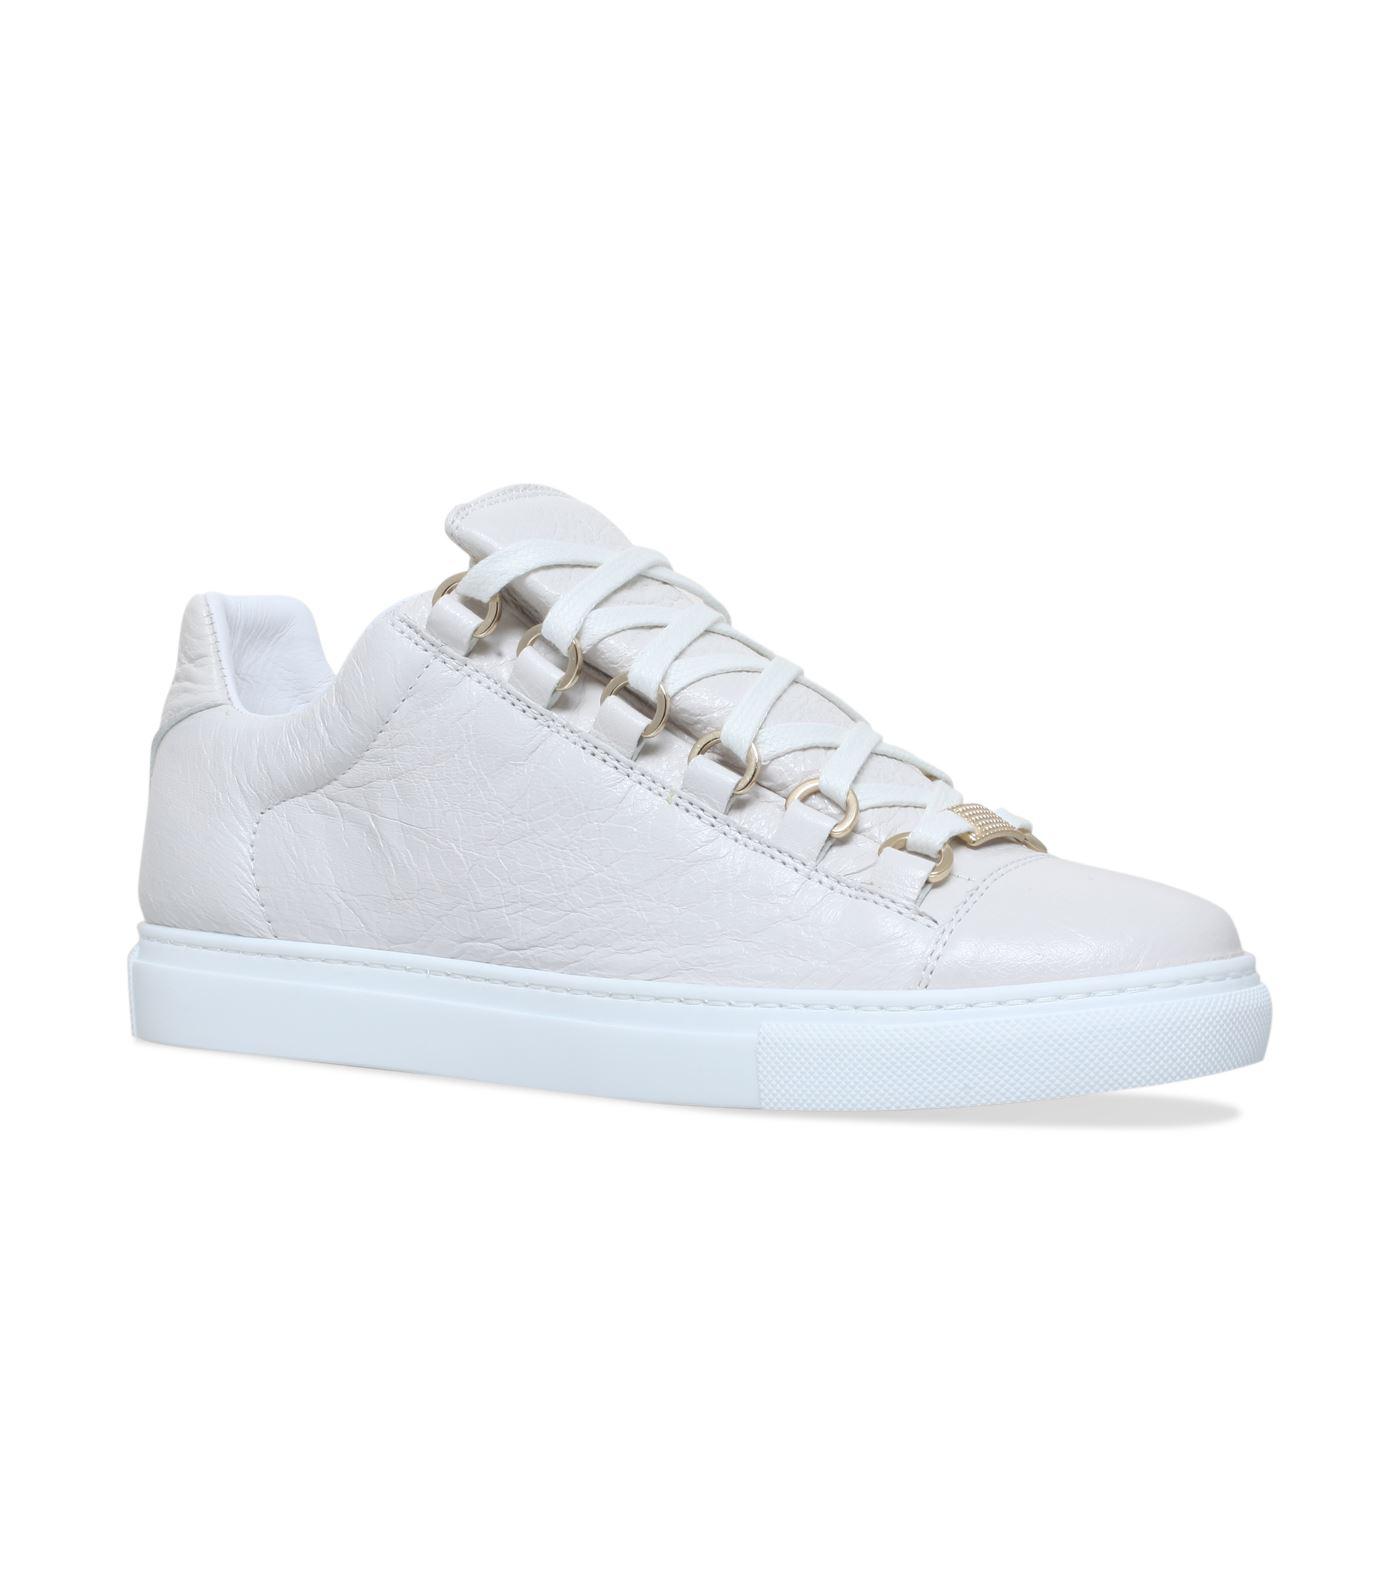 Balenciaga Arena Low Top Sneakers in White | Lyst